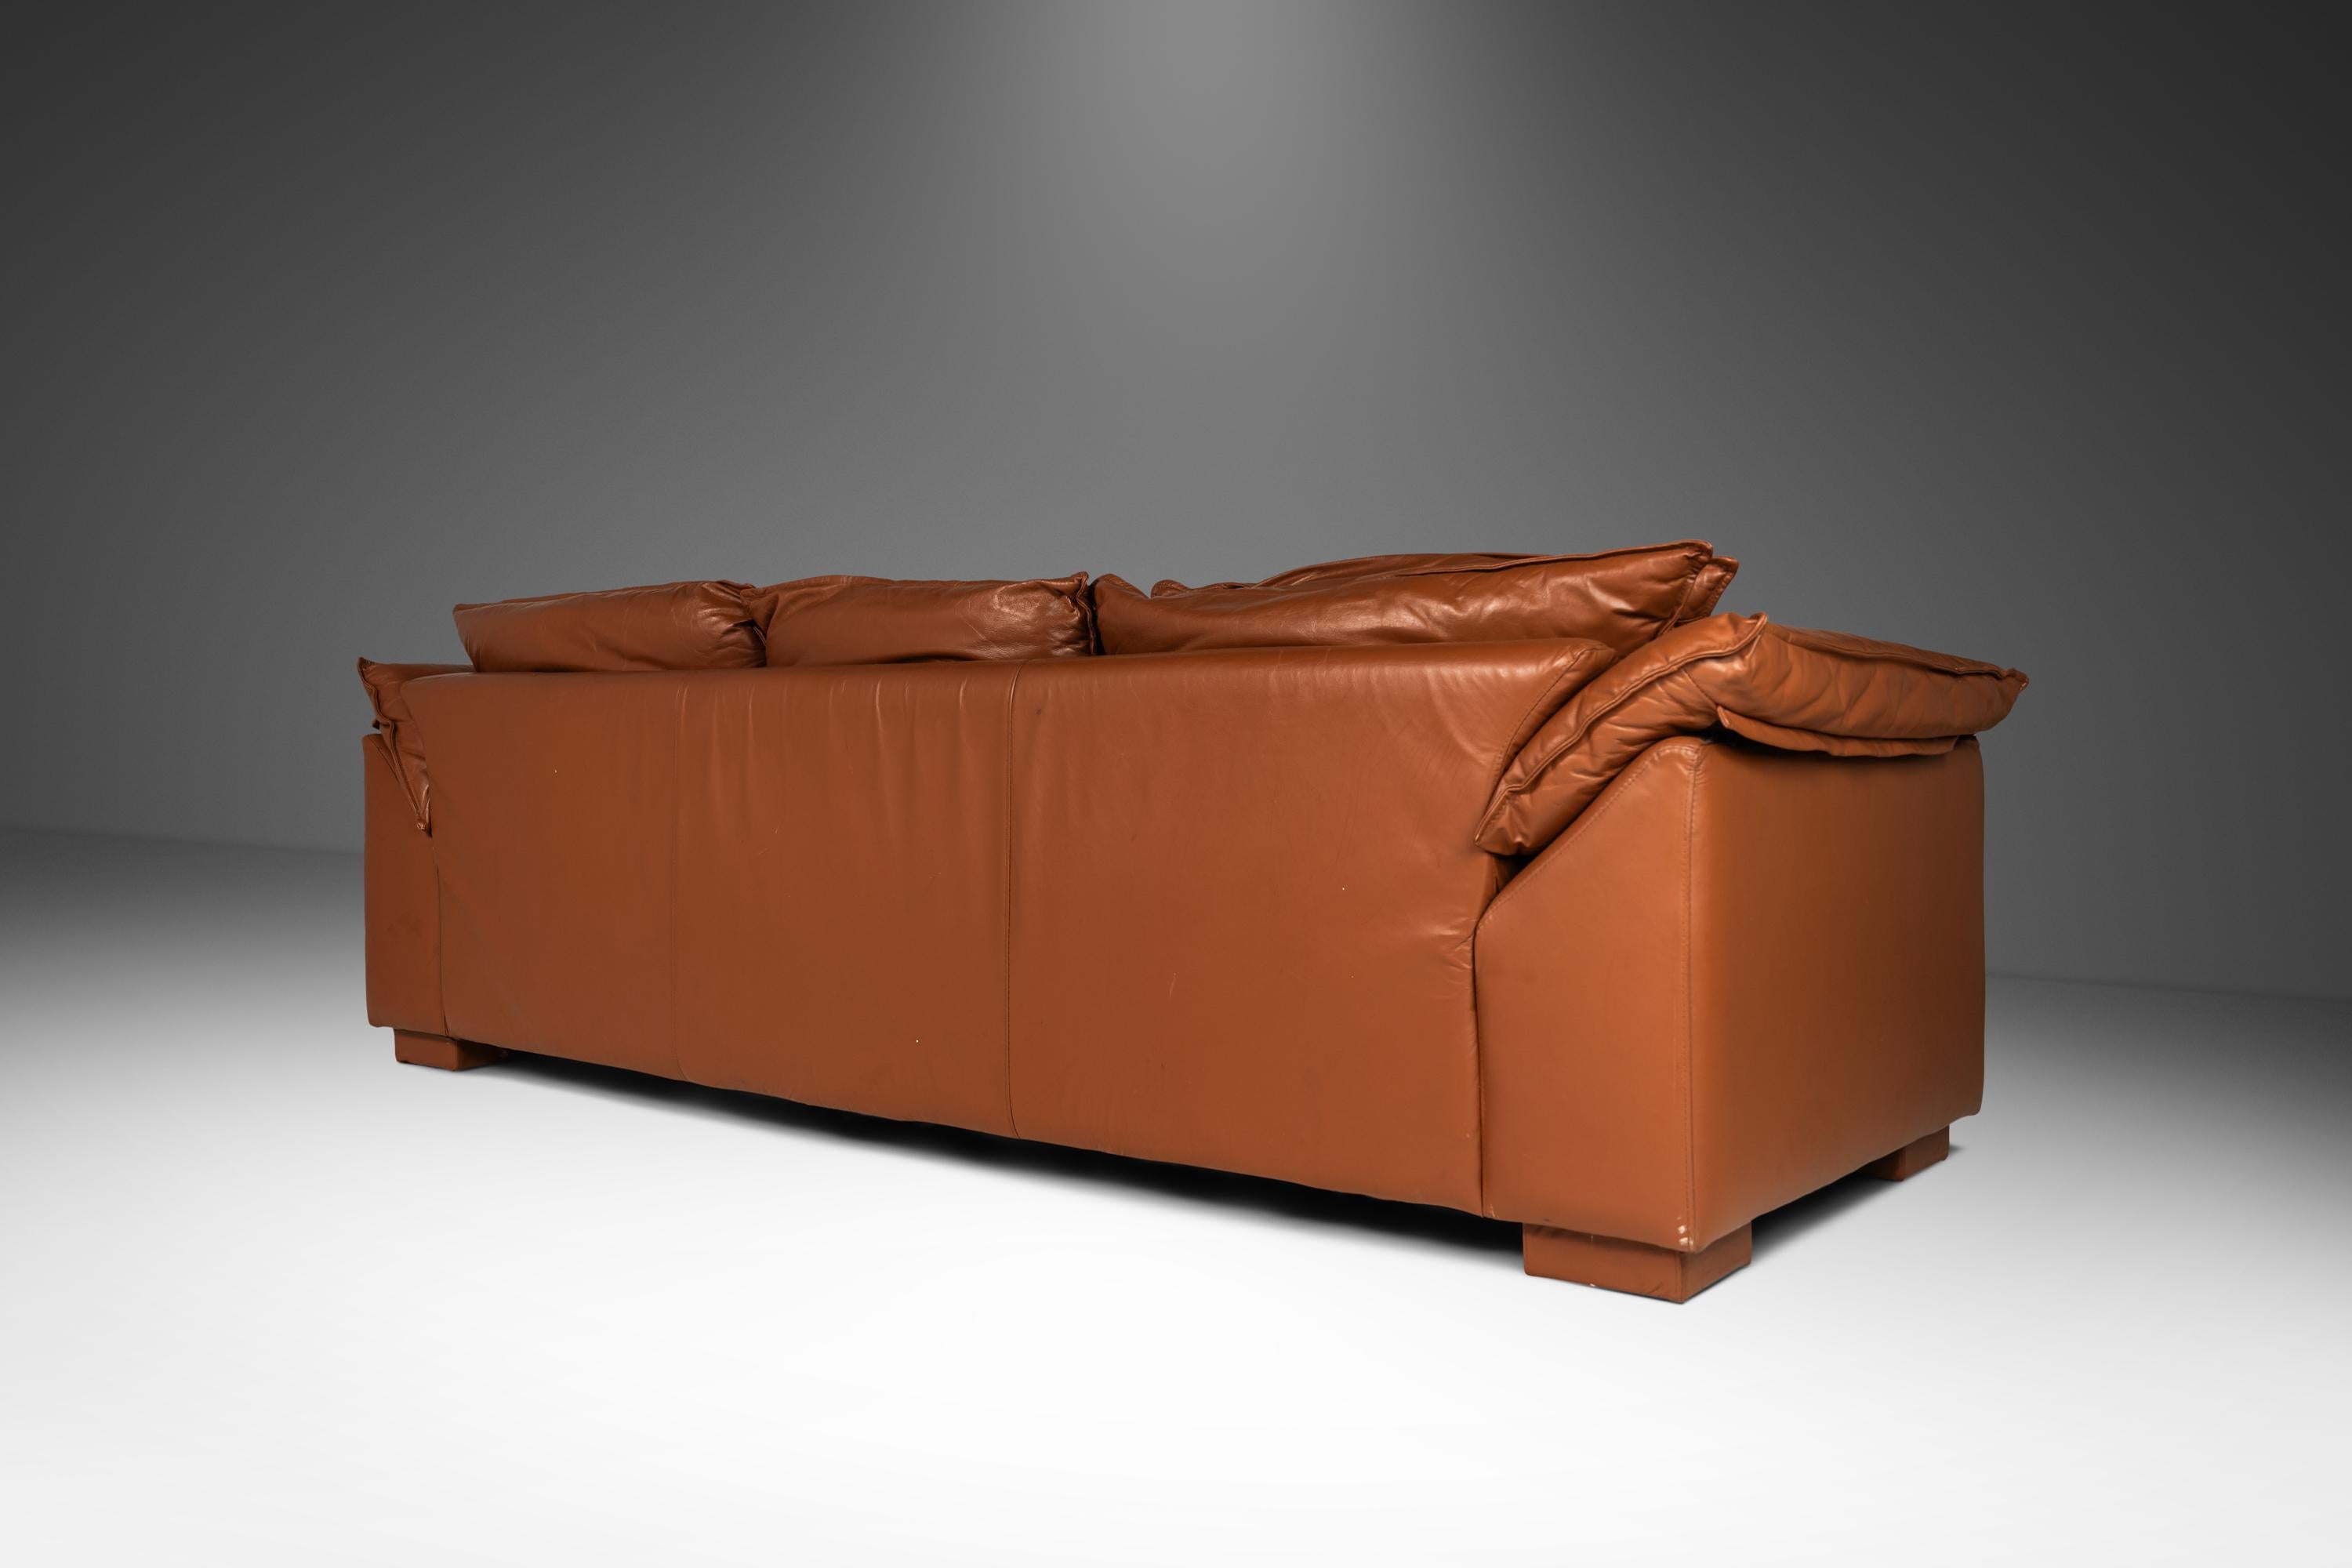 Low Profile Sofa in Cognac Brown Leather in the Manner of Niels Eilersen, 1980's For Sale 8